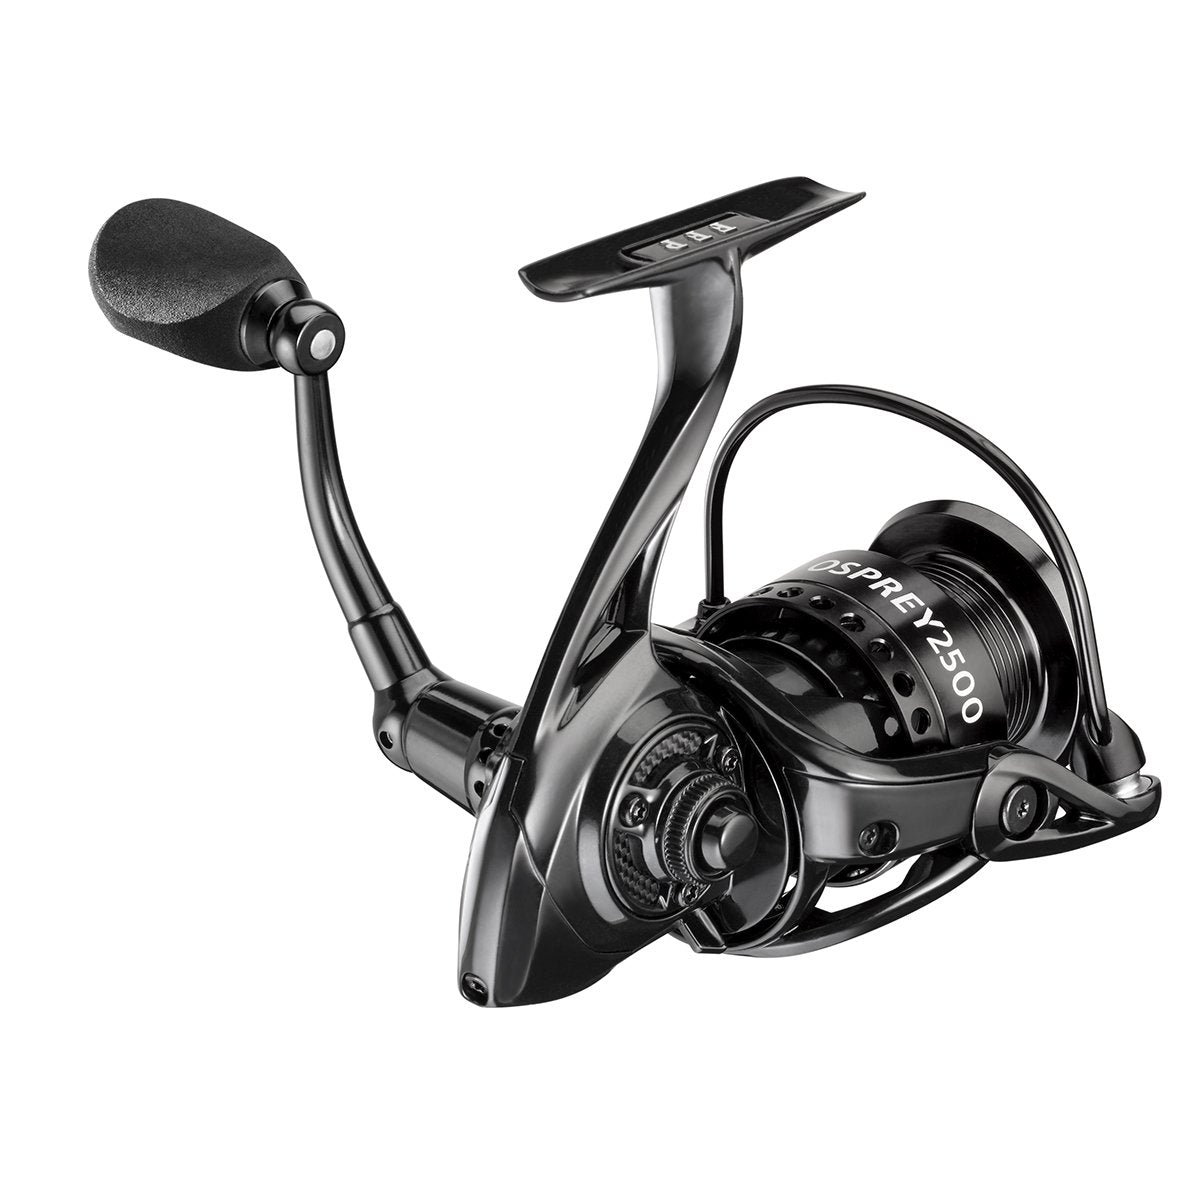 Florida Fishing Products Osprey 2500 Spinning Reel